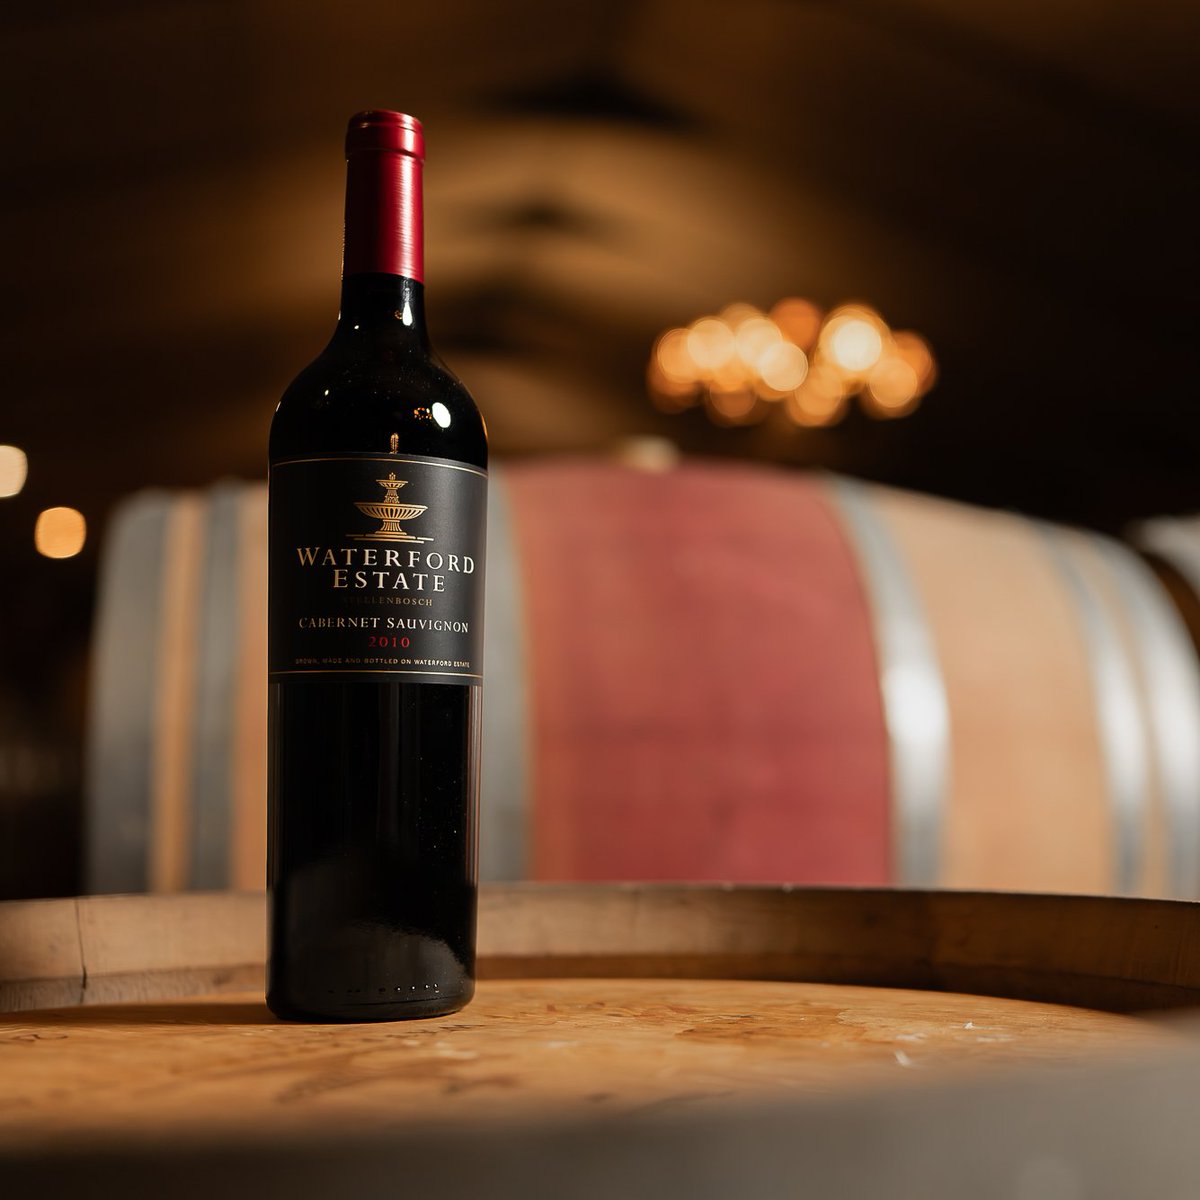 Waterford Estate Cabernet Sauvignon. Cellarmaster, Mark le Roux, feels Cabernet starts to show its unique character at the 10 year mark. Join us in our tasting room for the opportunity to taste our Cabernet through the ages in our Cellar Collection Tasting. #cabernetsauvignon